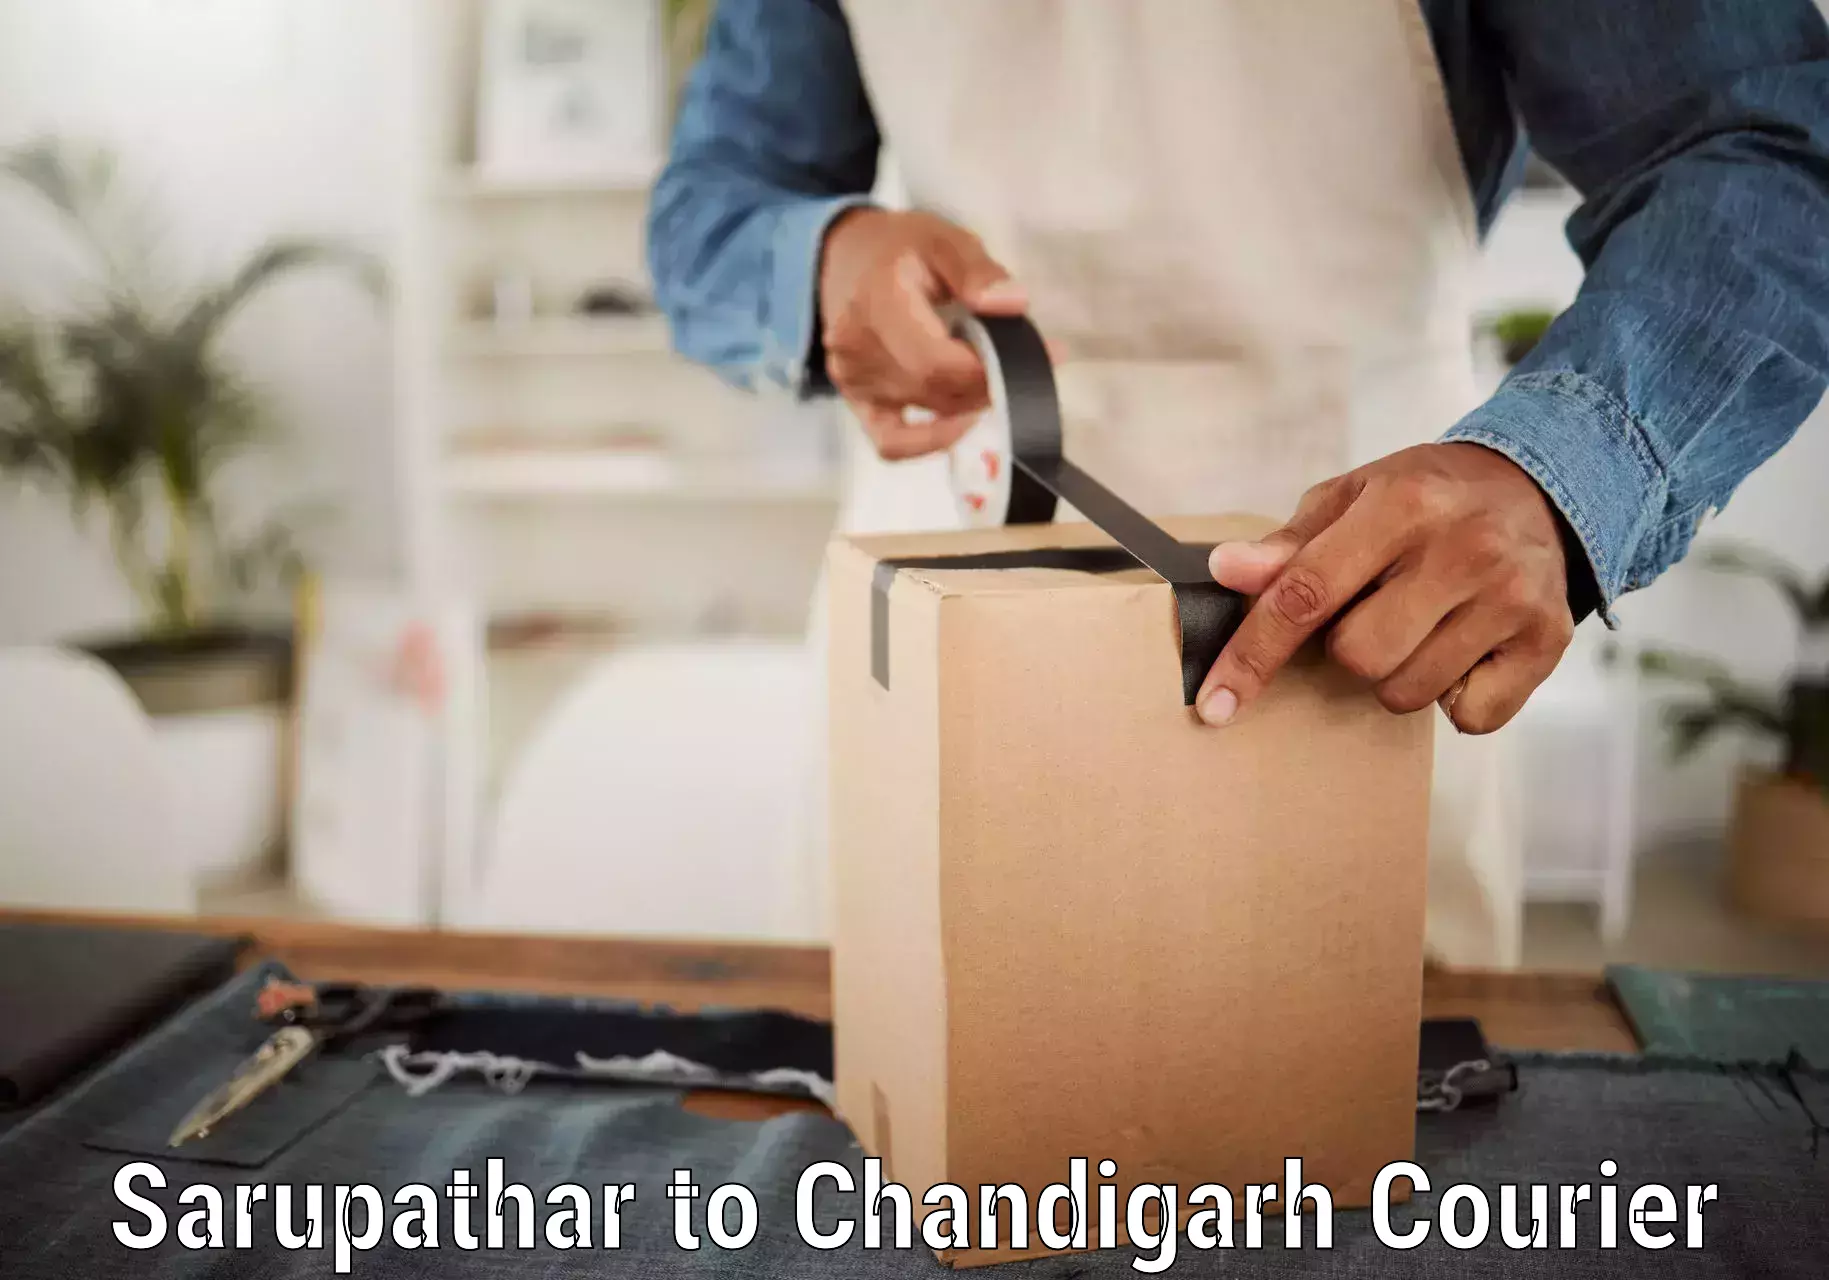 Automated parcel services Sarupathar to Chandigarh